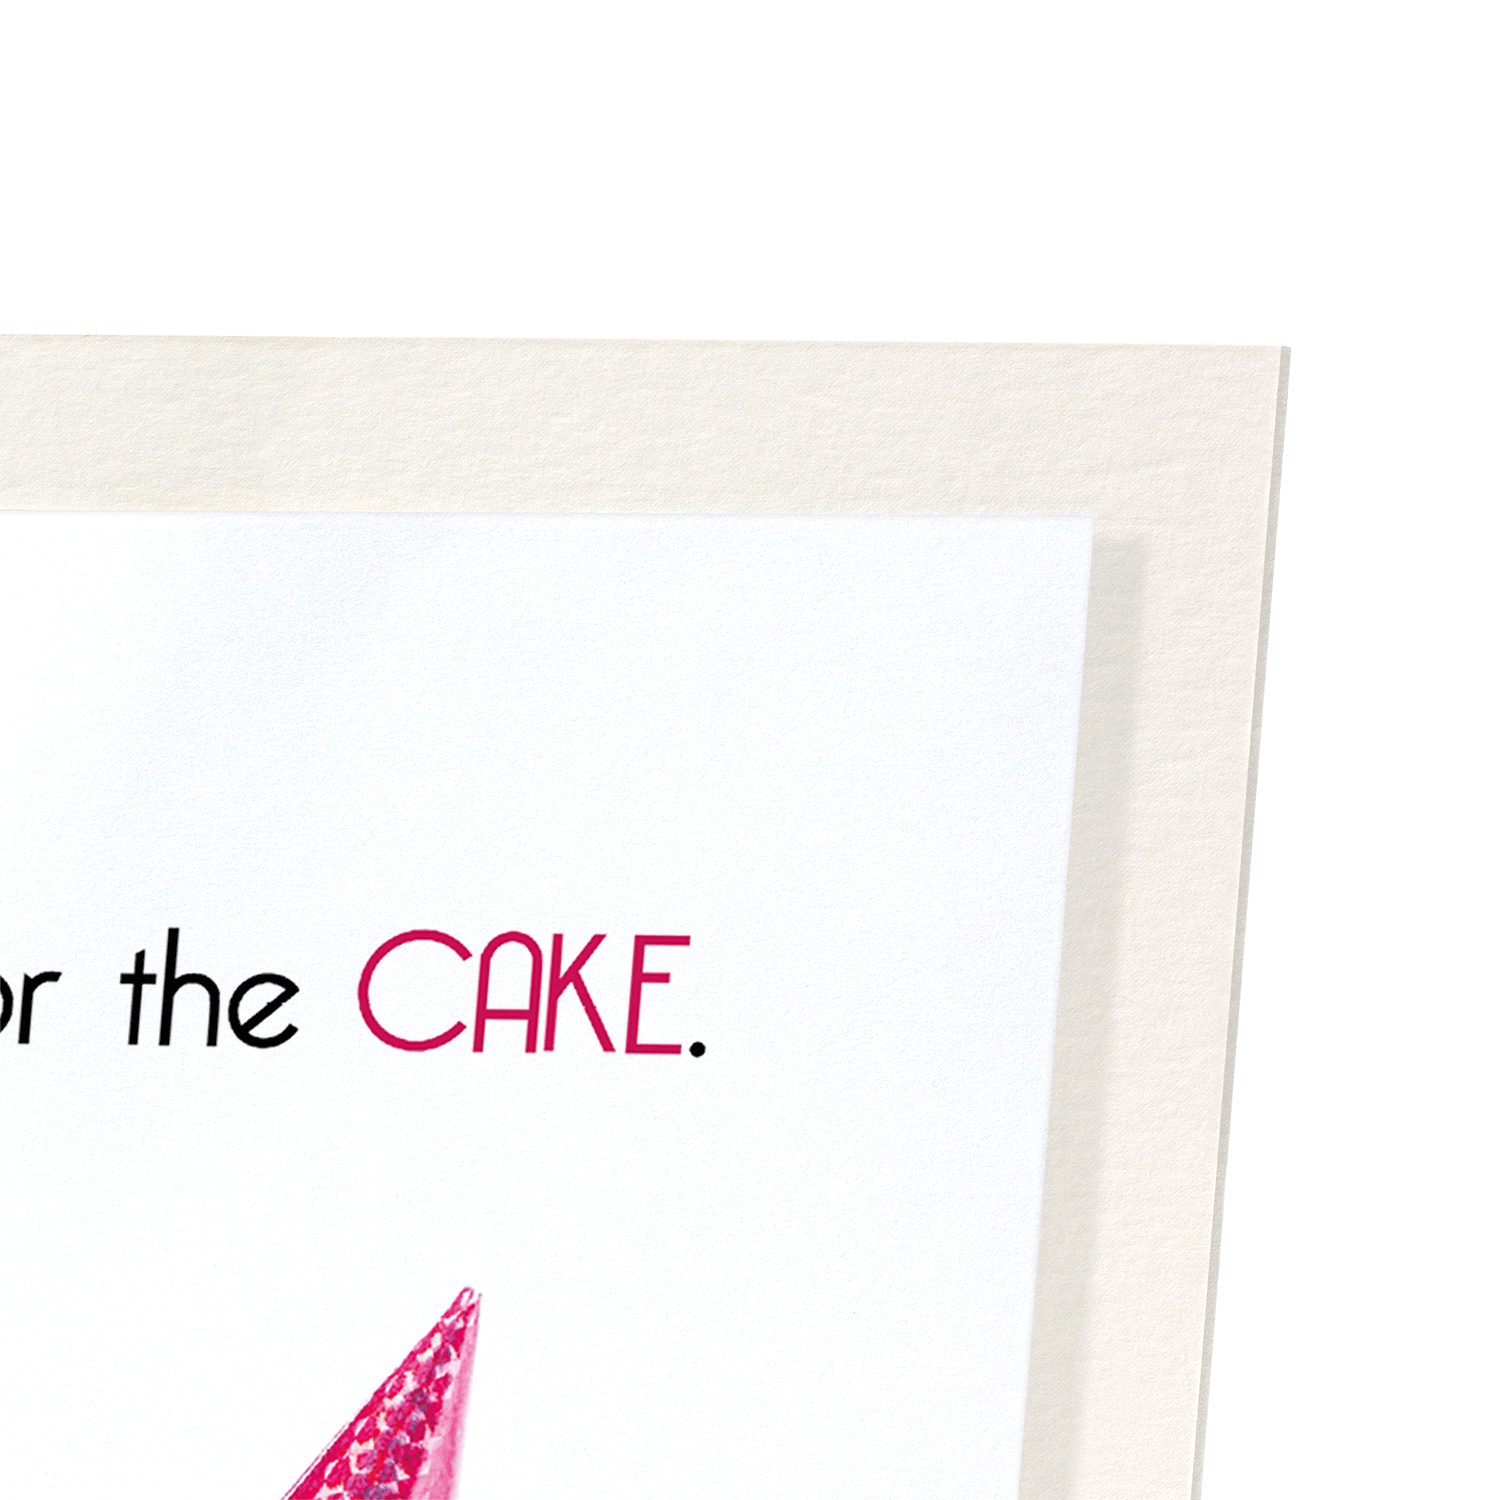 HERE FOR THE CAKE: Funny Animal Art print